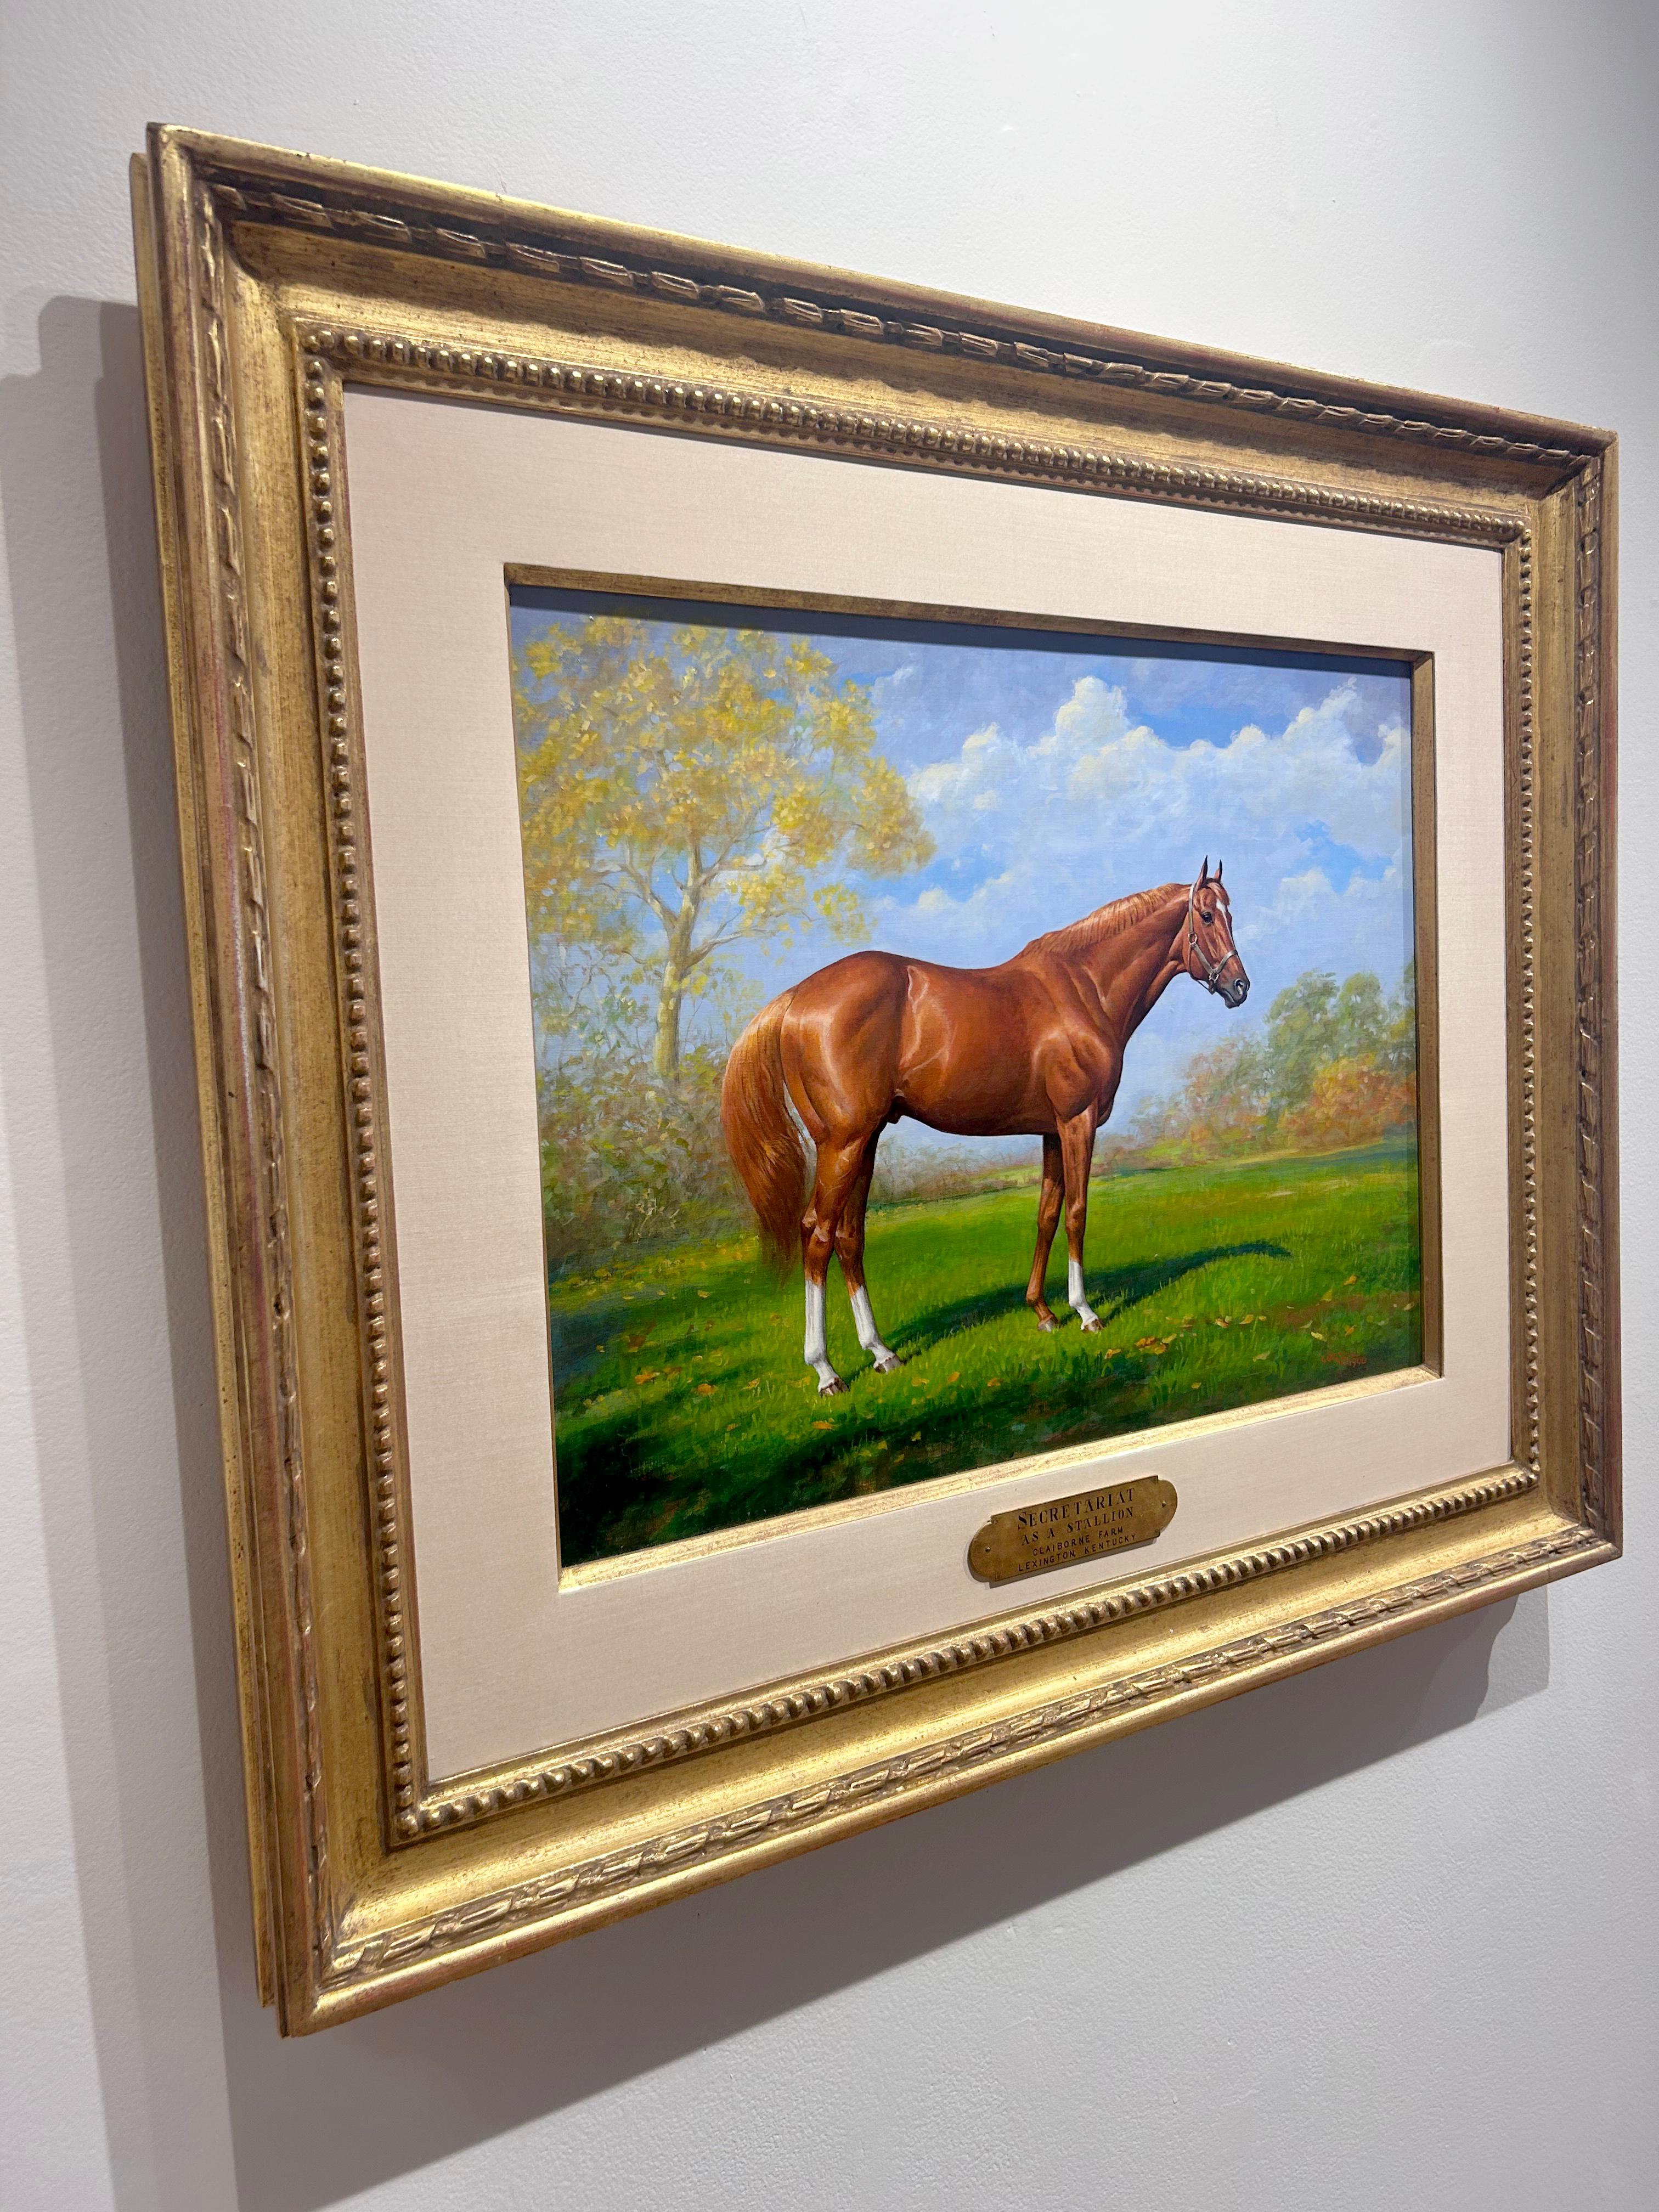 This rare original equine painting by renown artist, Jenness Cortez, features a stately portrait of legendary racehorse Secretariat standing in the lush verdant grass at Claiborne Farm. Bathing in the warmth of an afternoon sun, Secretariat's